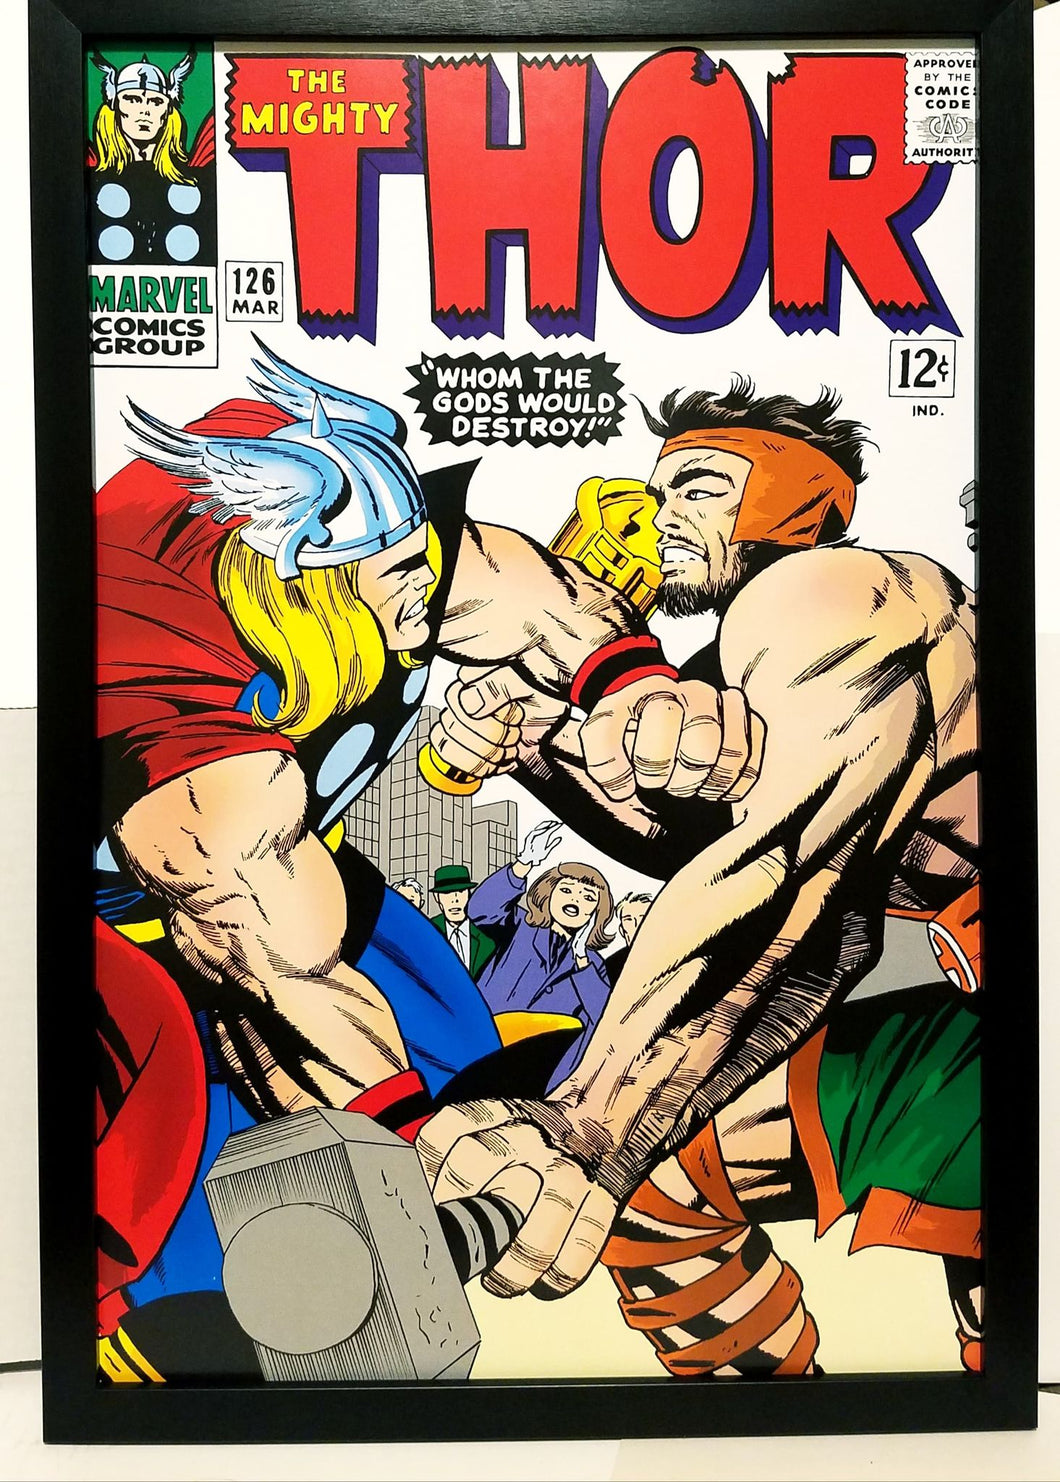 Mighty Thor #126 by Jack Kirby 12x18 FRAMED Marvel Comics Vintage Art Print Poster